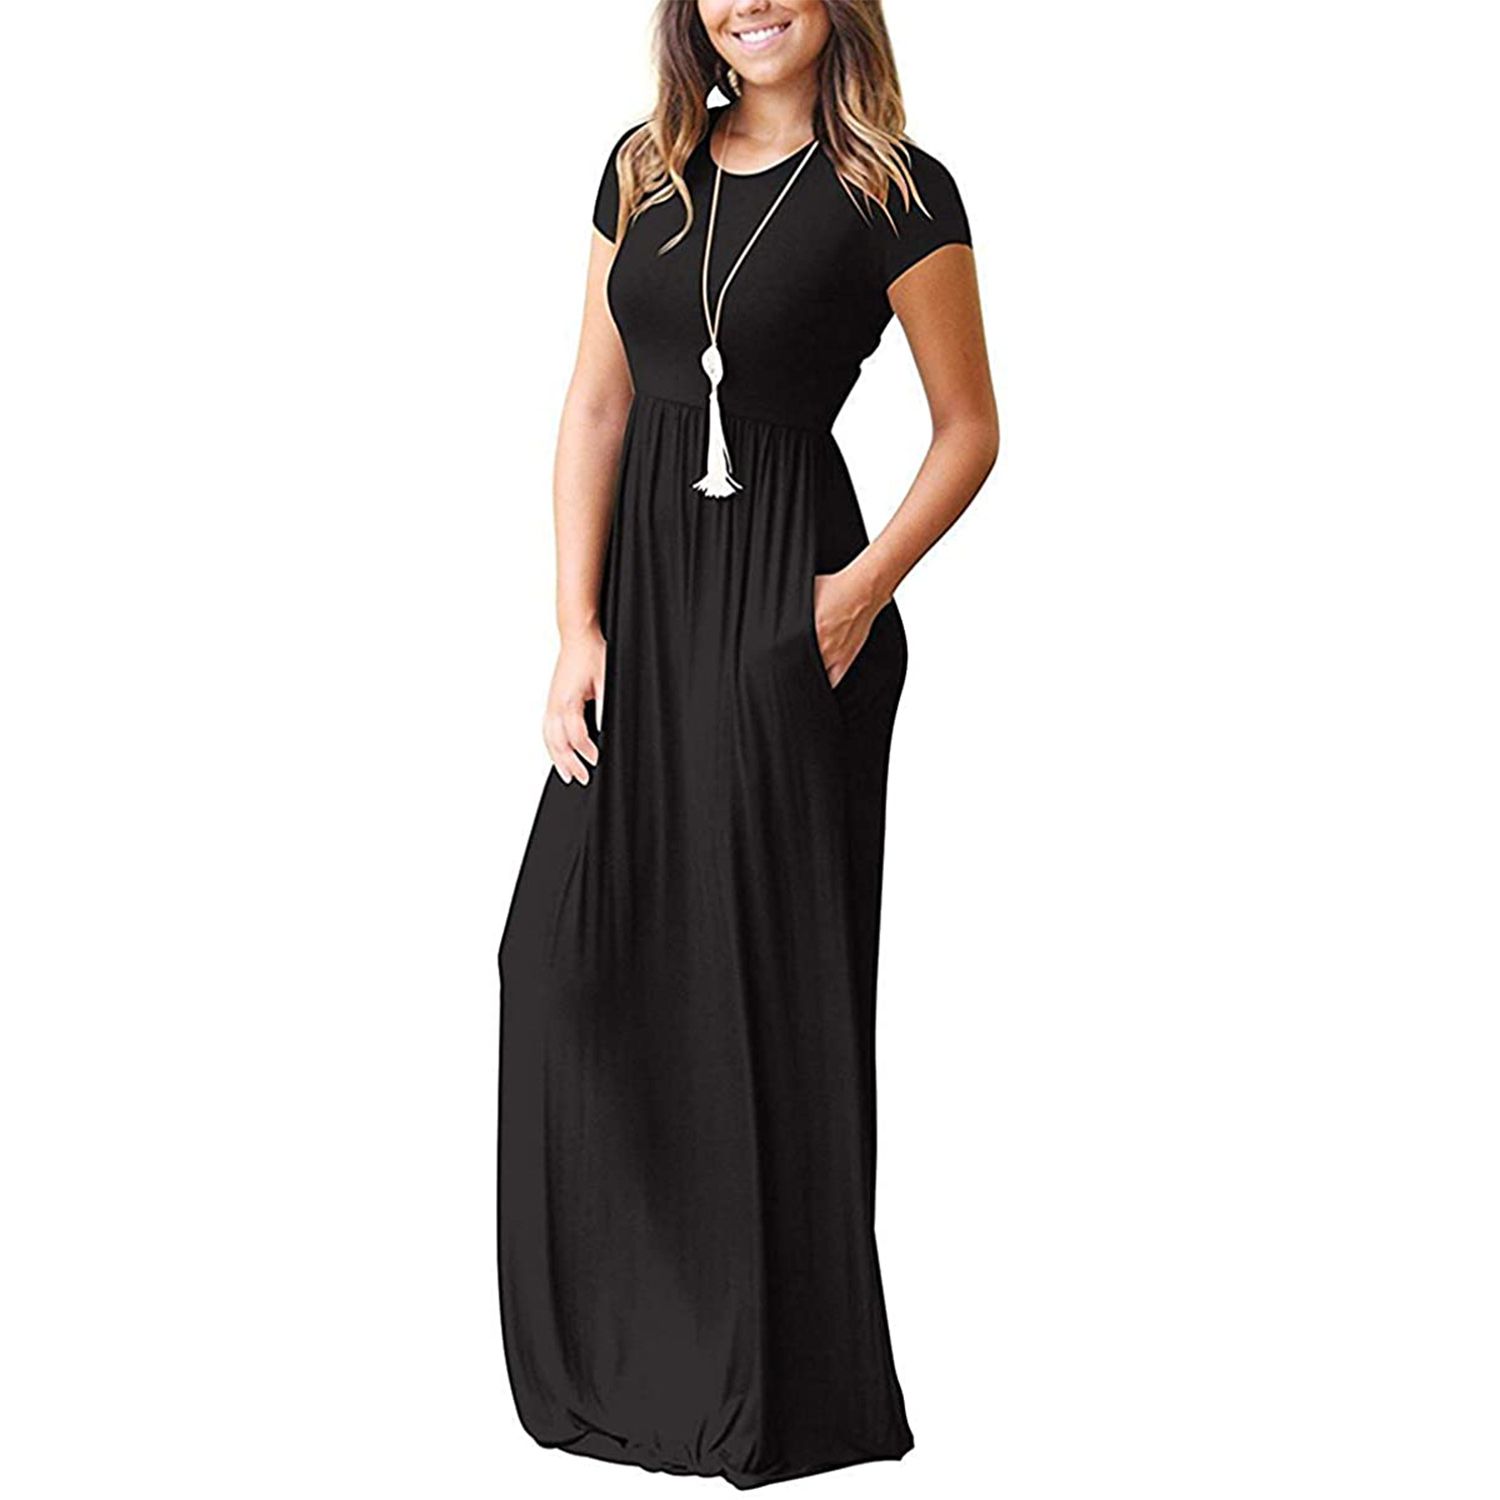 Amazon Shoppers Are Swooning Over This Comfortable Maxi Dress with ...